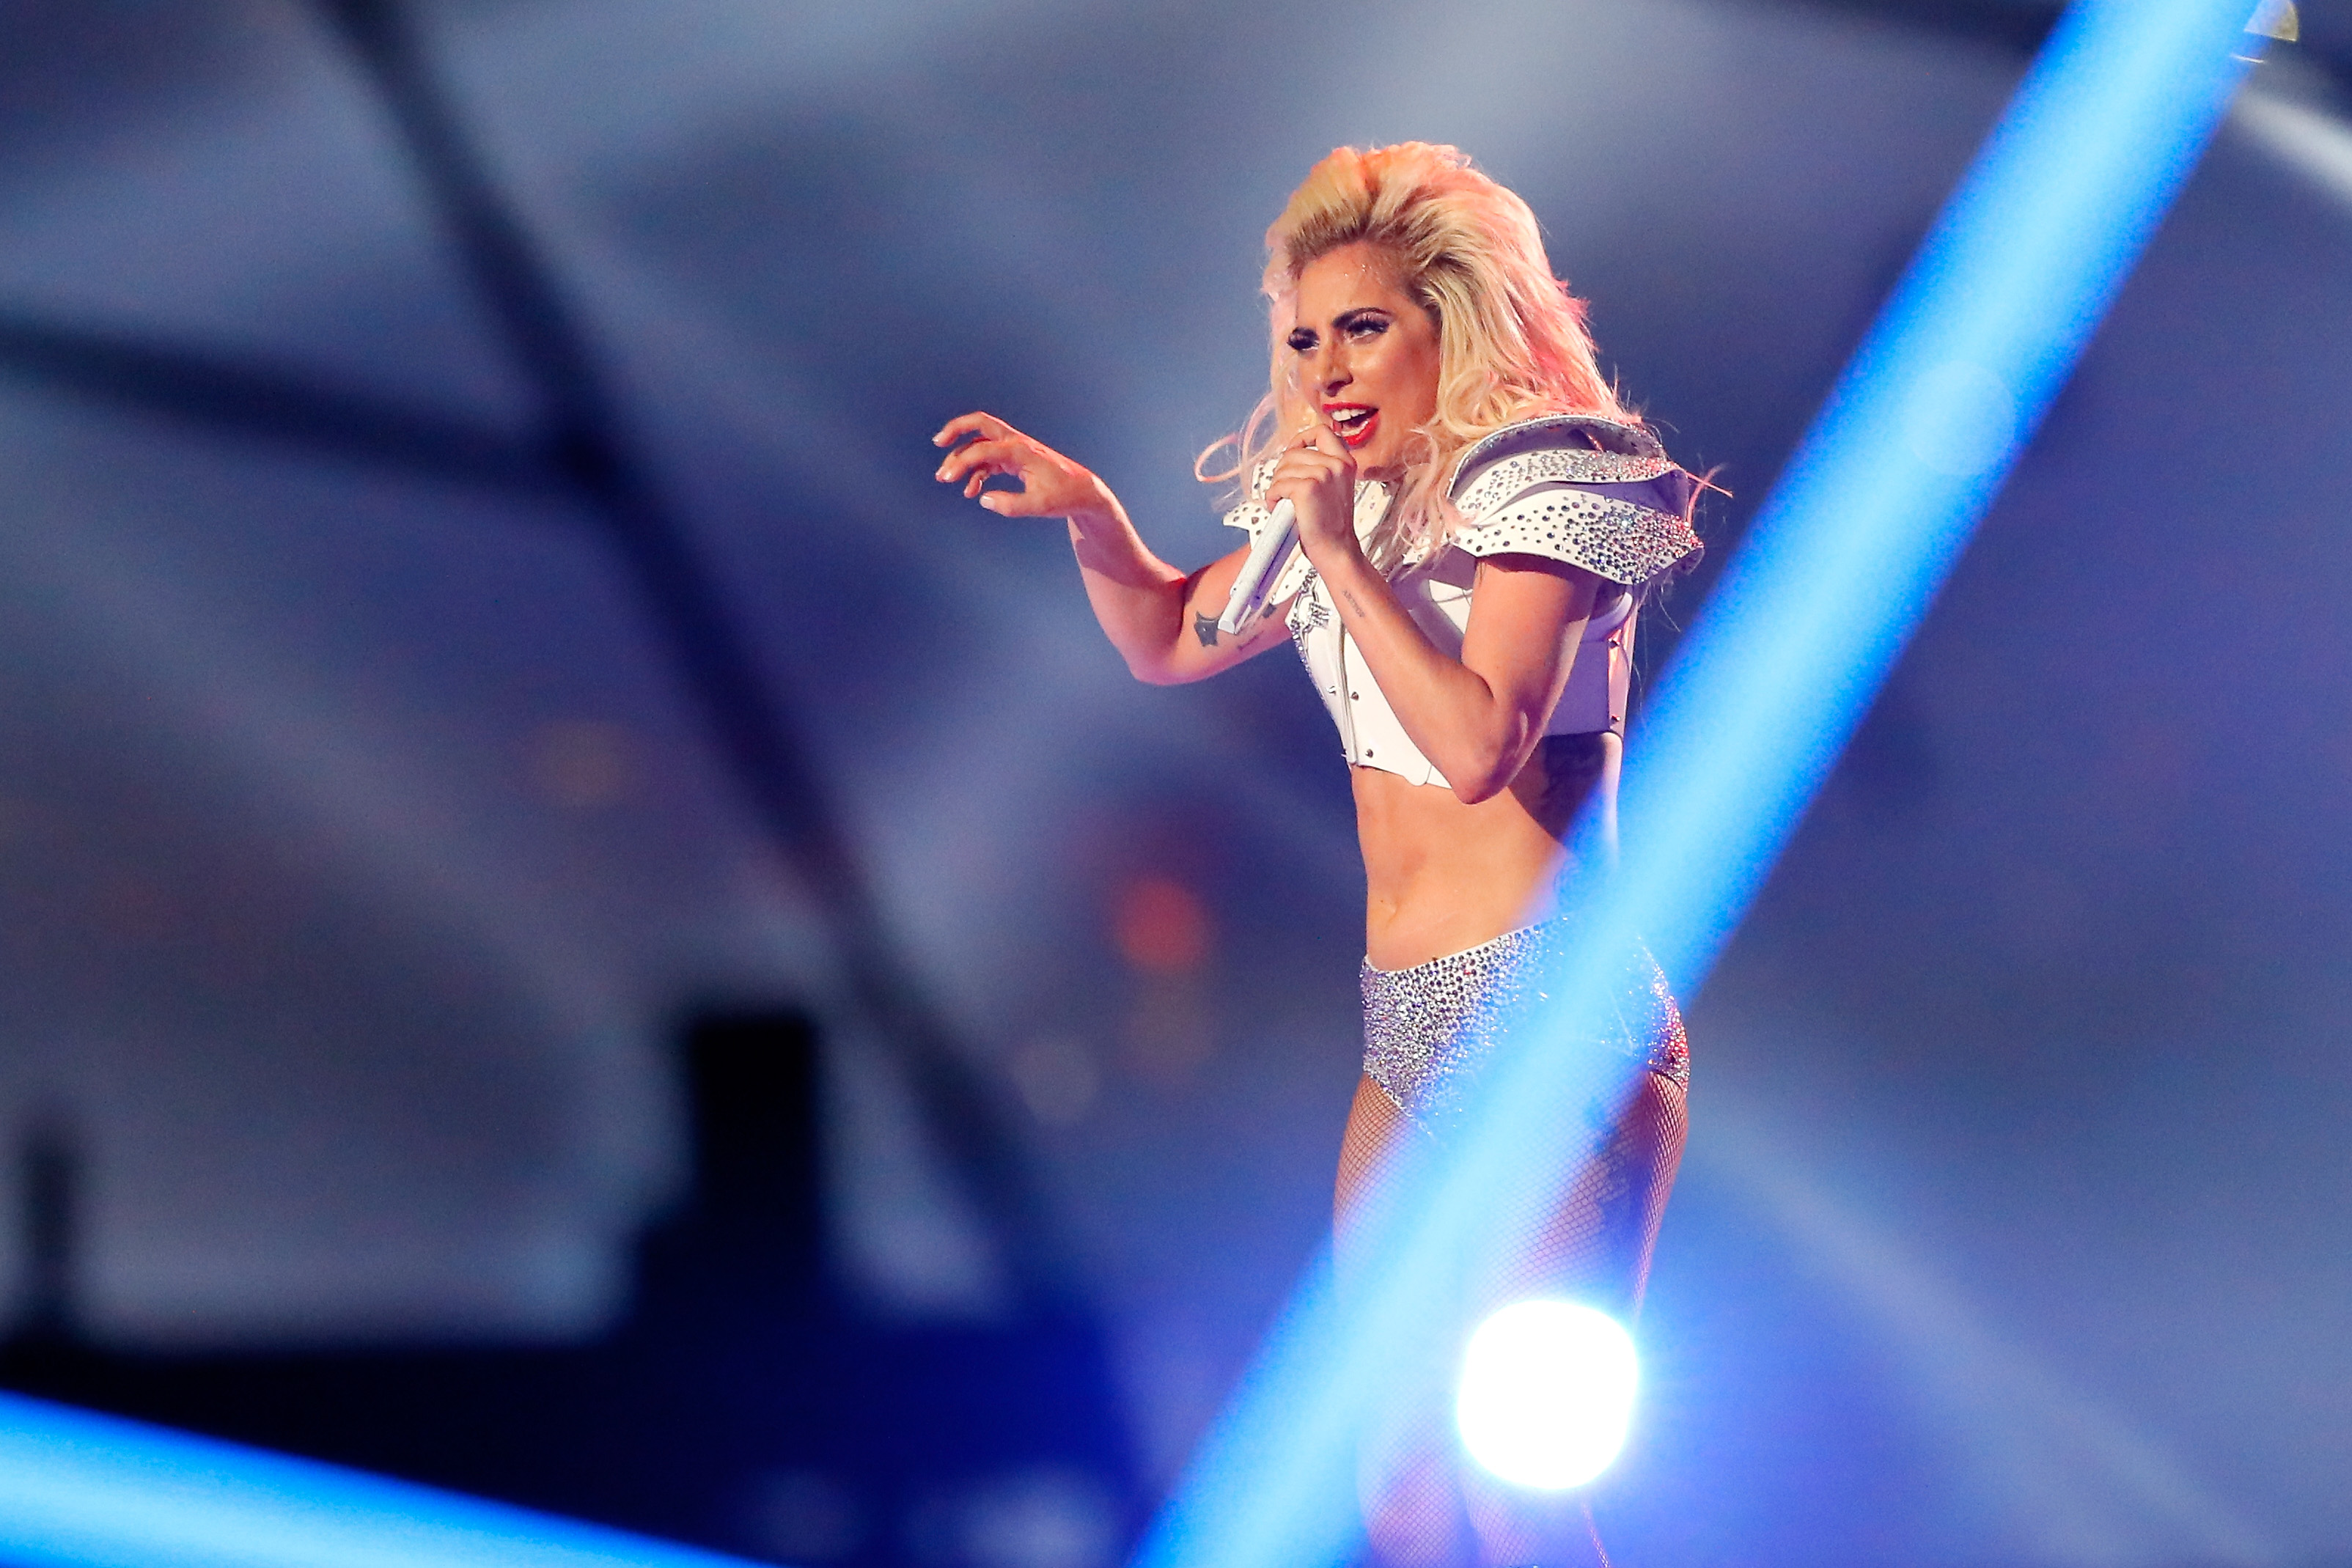 HOUSTON, TX - FEBRUARY 05: Lady Gaga performs during the Pepsi Zero Sugar Super Bowl 51 Halftime Show at NRG Stadium on February 5, 2017 in Houston, Texas. (Photo by Kevin C. Cox/Getty Images)